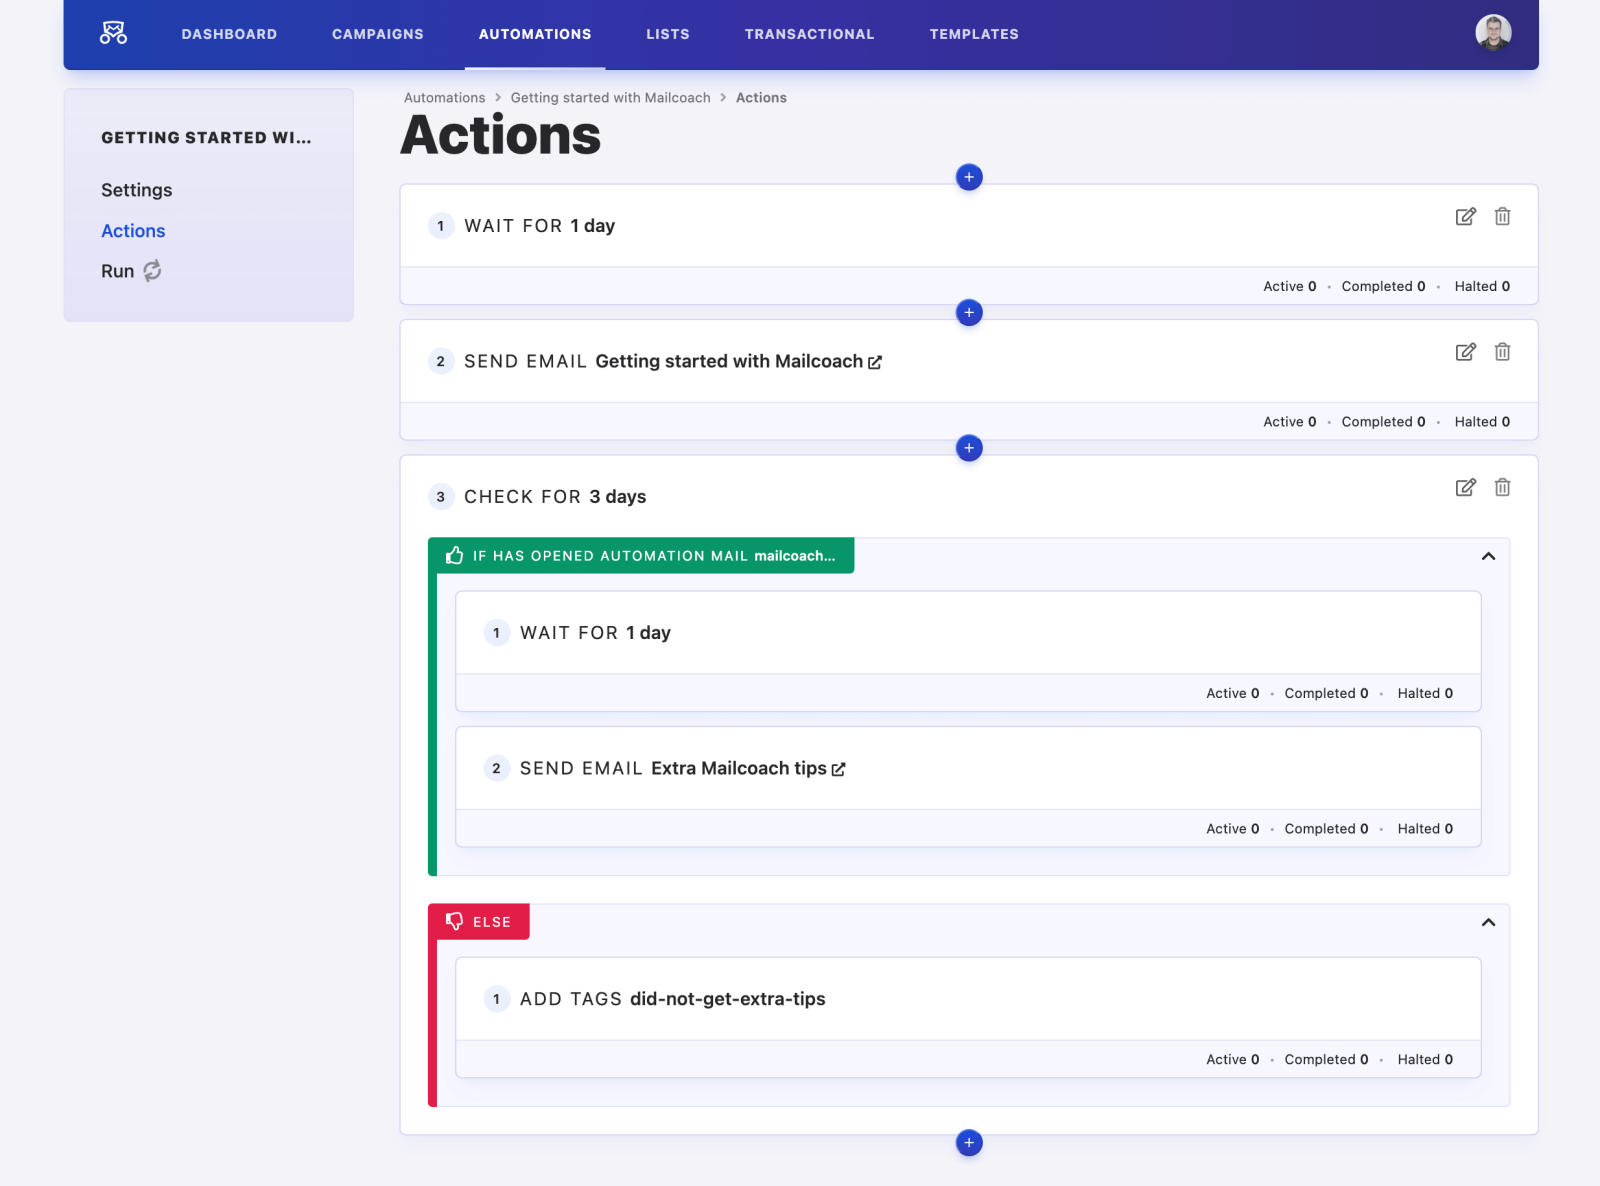 automation actions